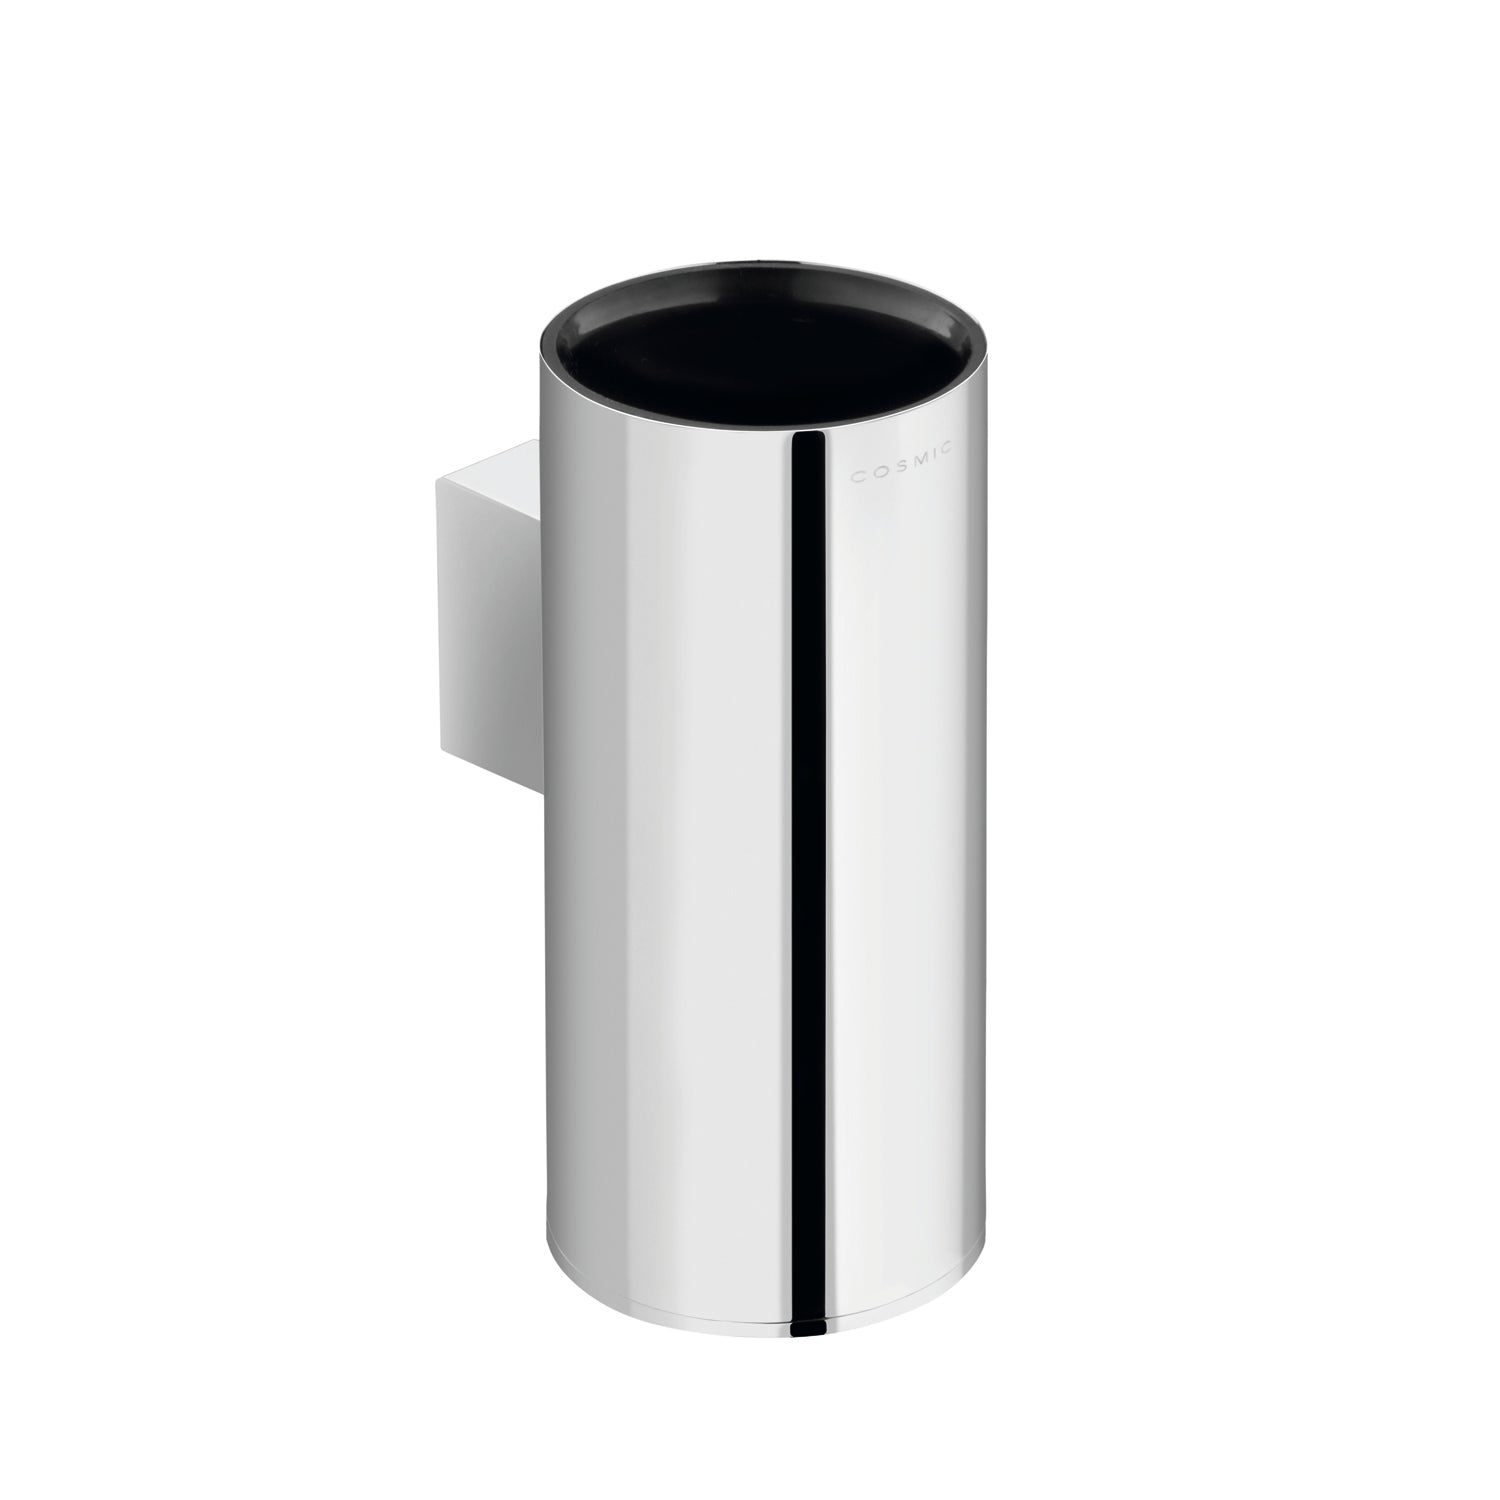 COSMIC Project Bathroom Single Tumbler Toothbrush Holder, Wall Mount, Plastic Cup, Chrome Finish, 2-3/8 x 5-1/2 x 3-9/16 Inches (2510154)